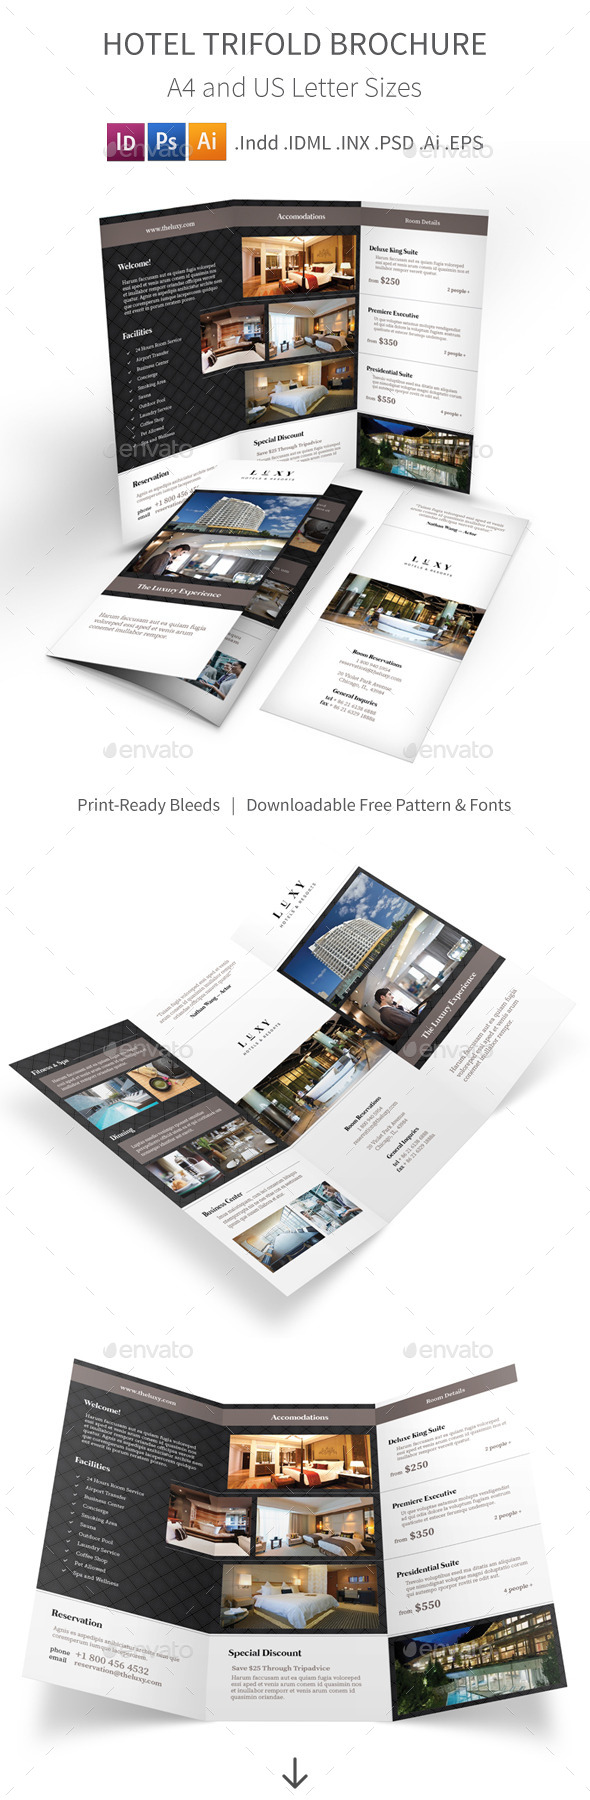 Hotel Trifold Brochure by Mike_pantone | GraphicRiver